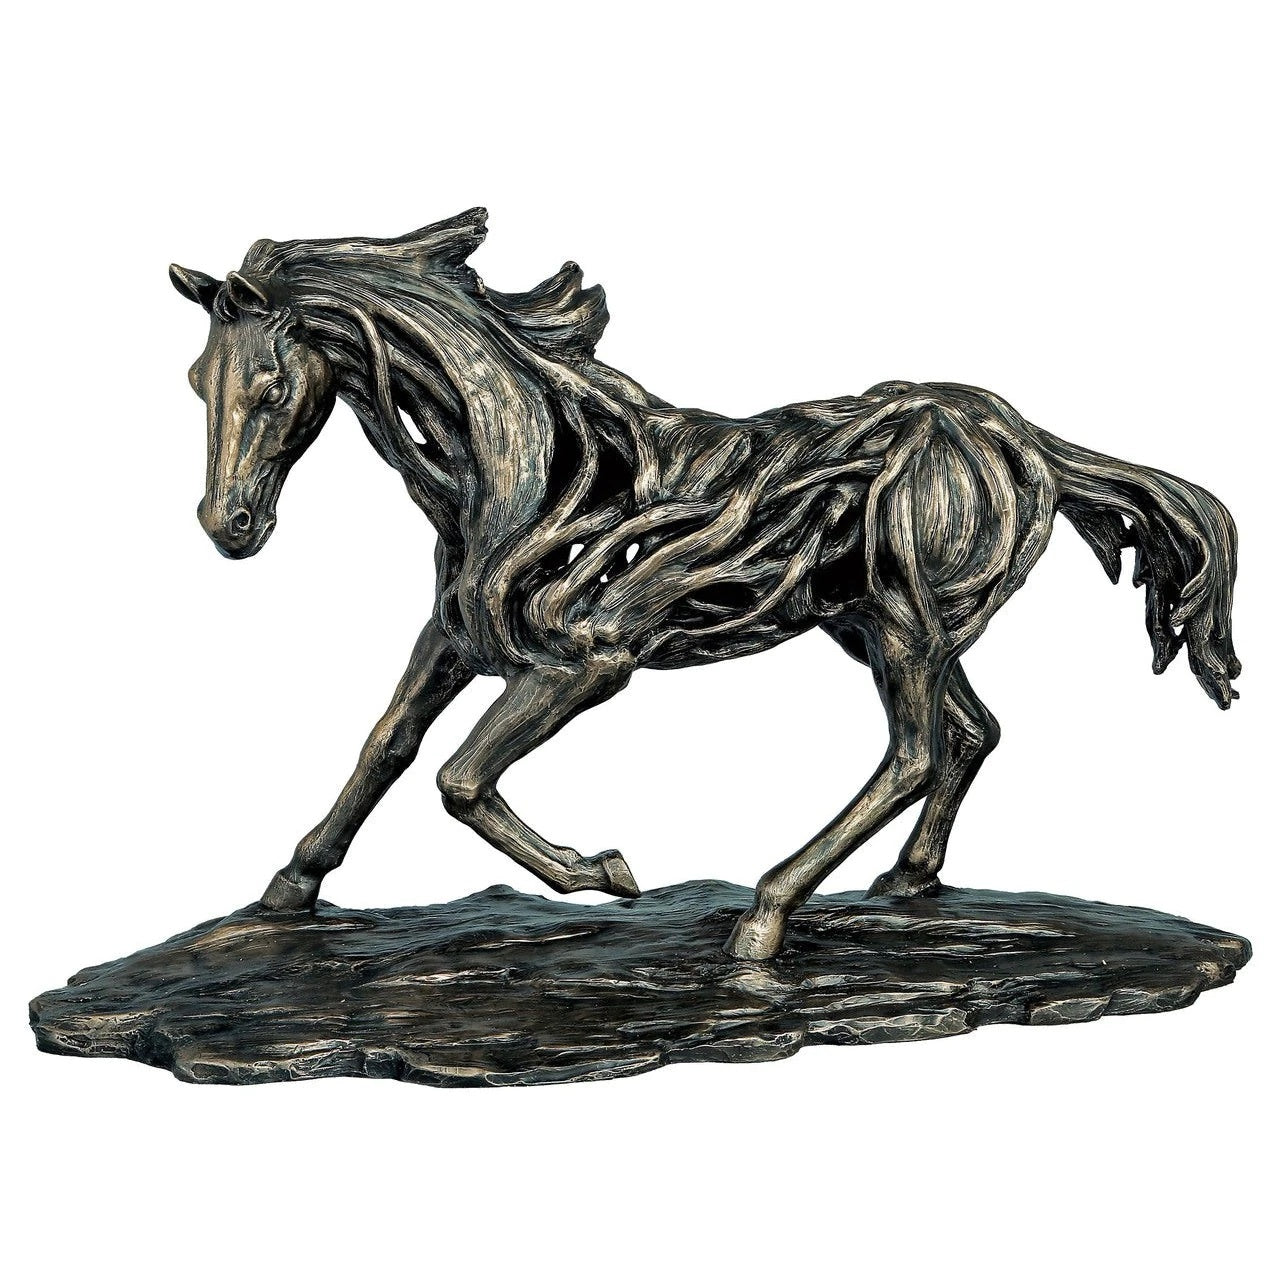 Genesis Free Spirit  Driftwood style horse in motion. One of the many pieces in our equine range.  Genesis Fine Arts has evolved into a much loved and world famous Irish brand to produce a striking range of handcrafted cold cast bronze sculptures.